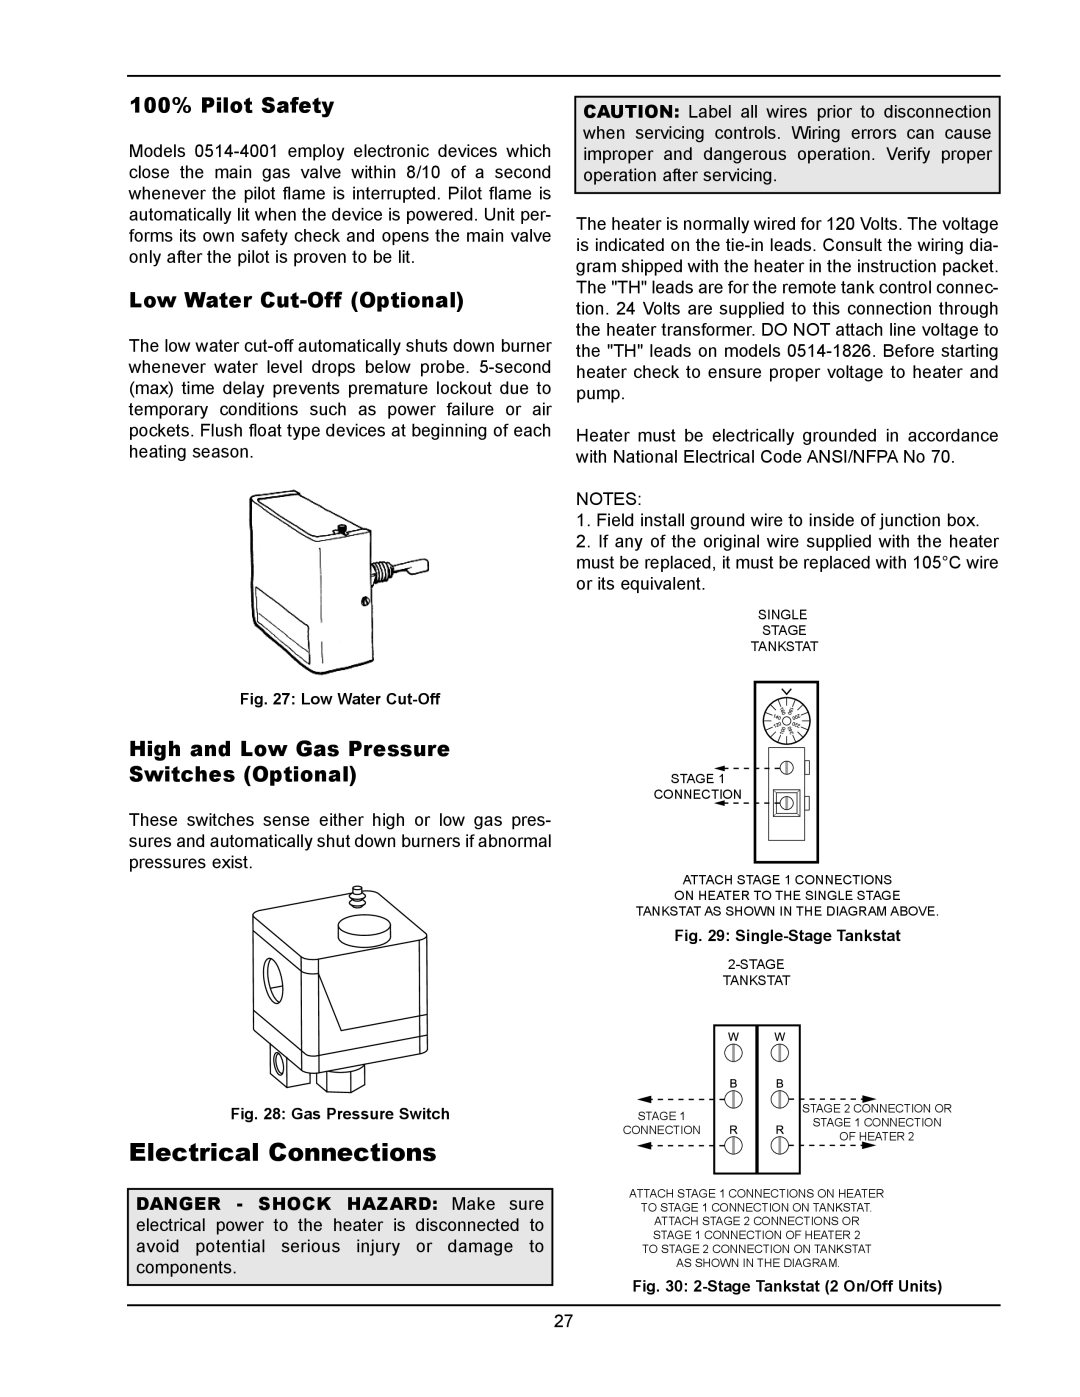 Raypak 1334001 operating instructions Electrical Connections, 100% Pilot Safety, Low Water Cut-OffOptional 